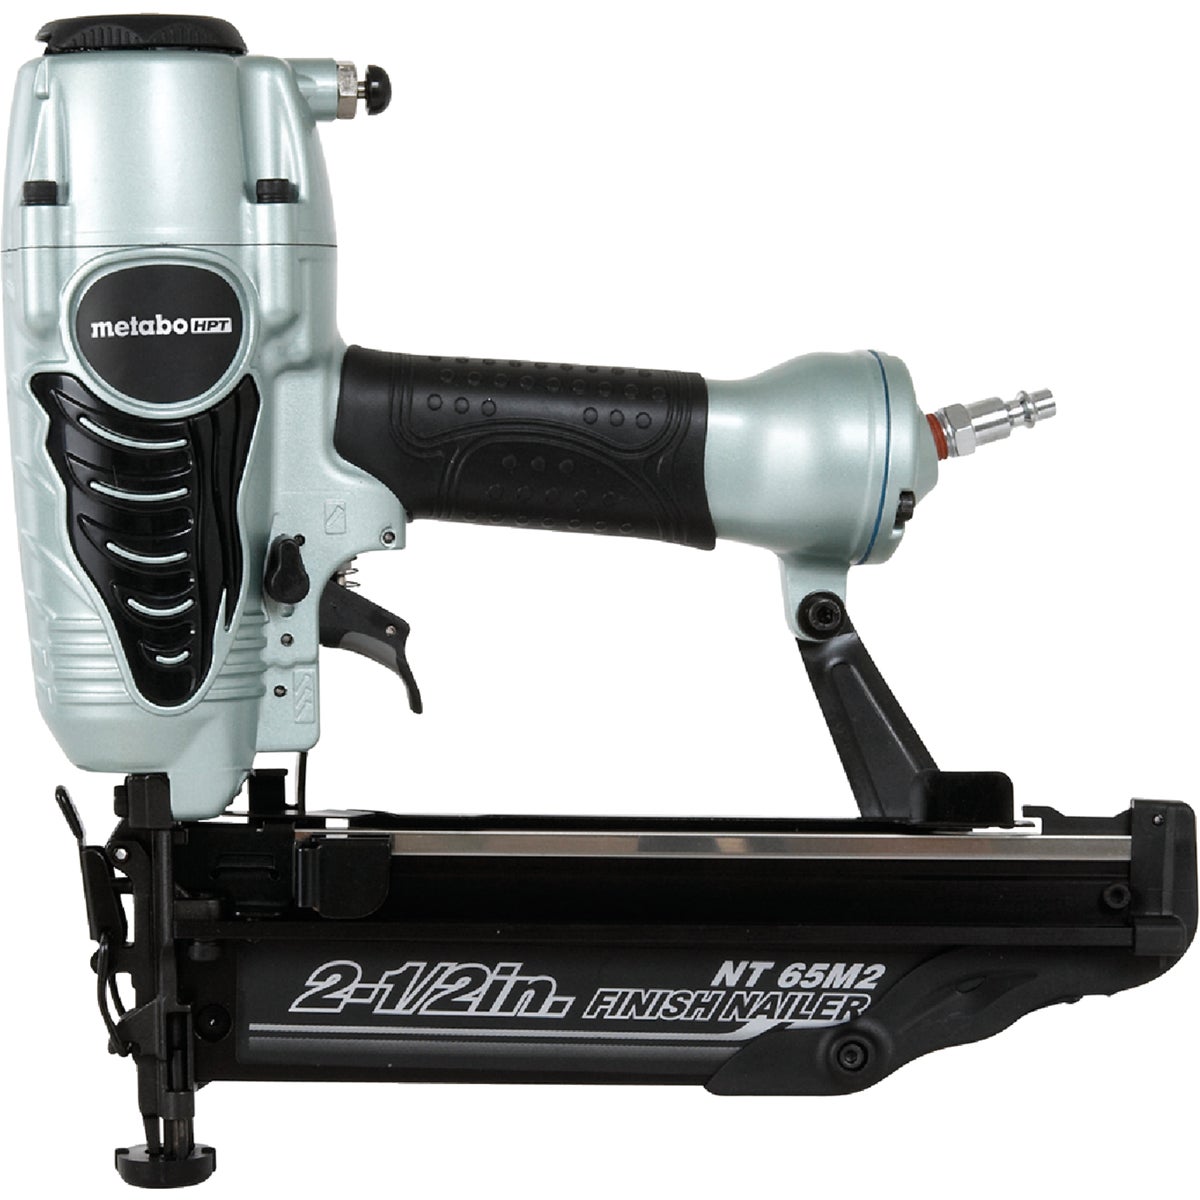 Metabo HPT 16-Gauge 2-1/2 In. Straight Finish Nailer with Air Duster